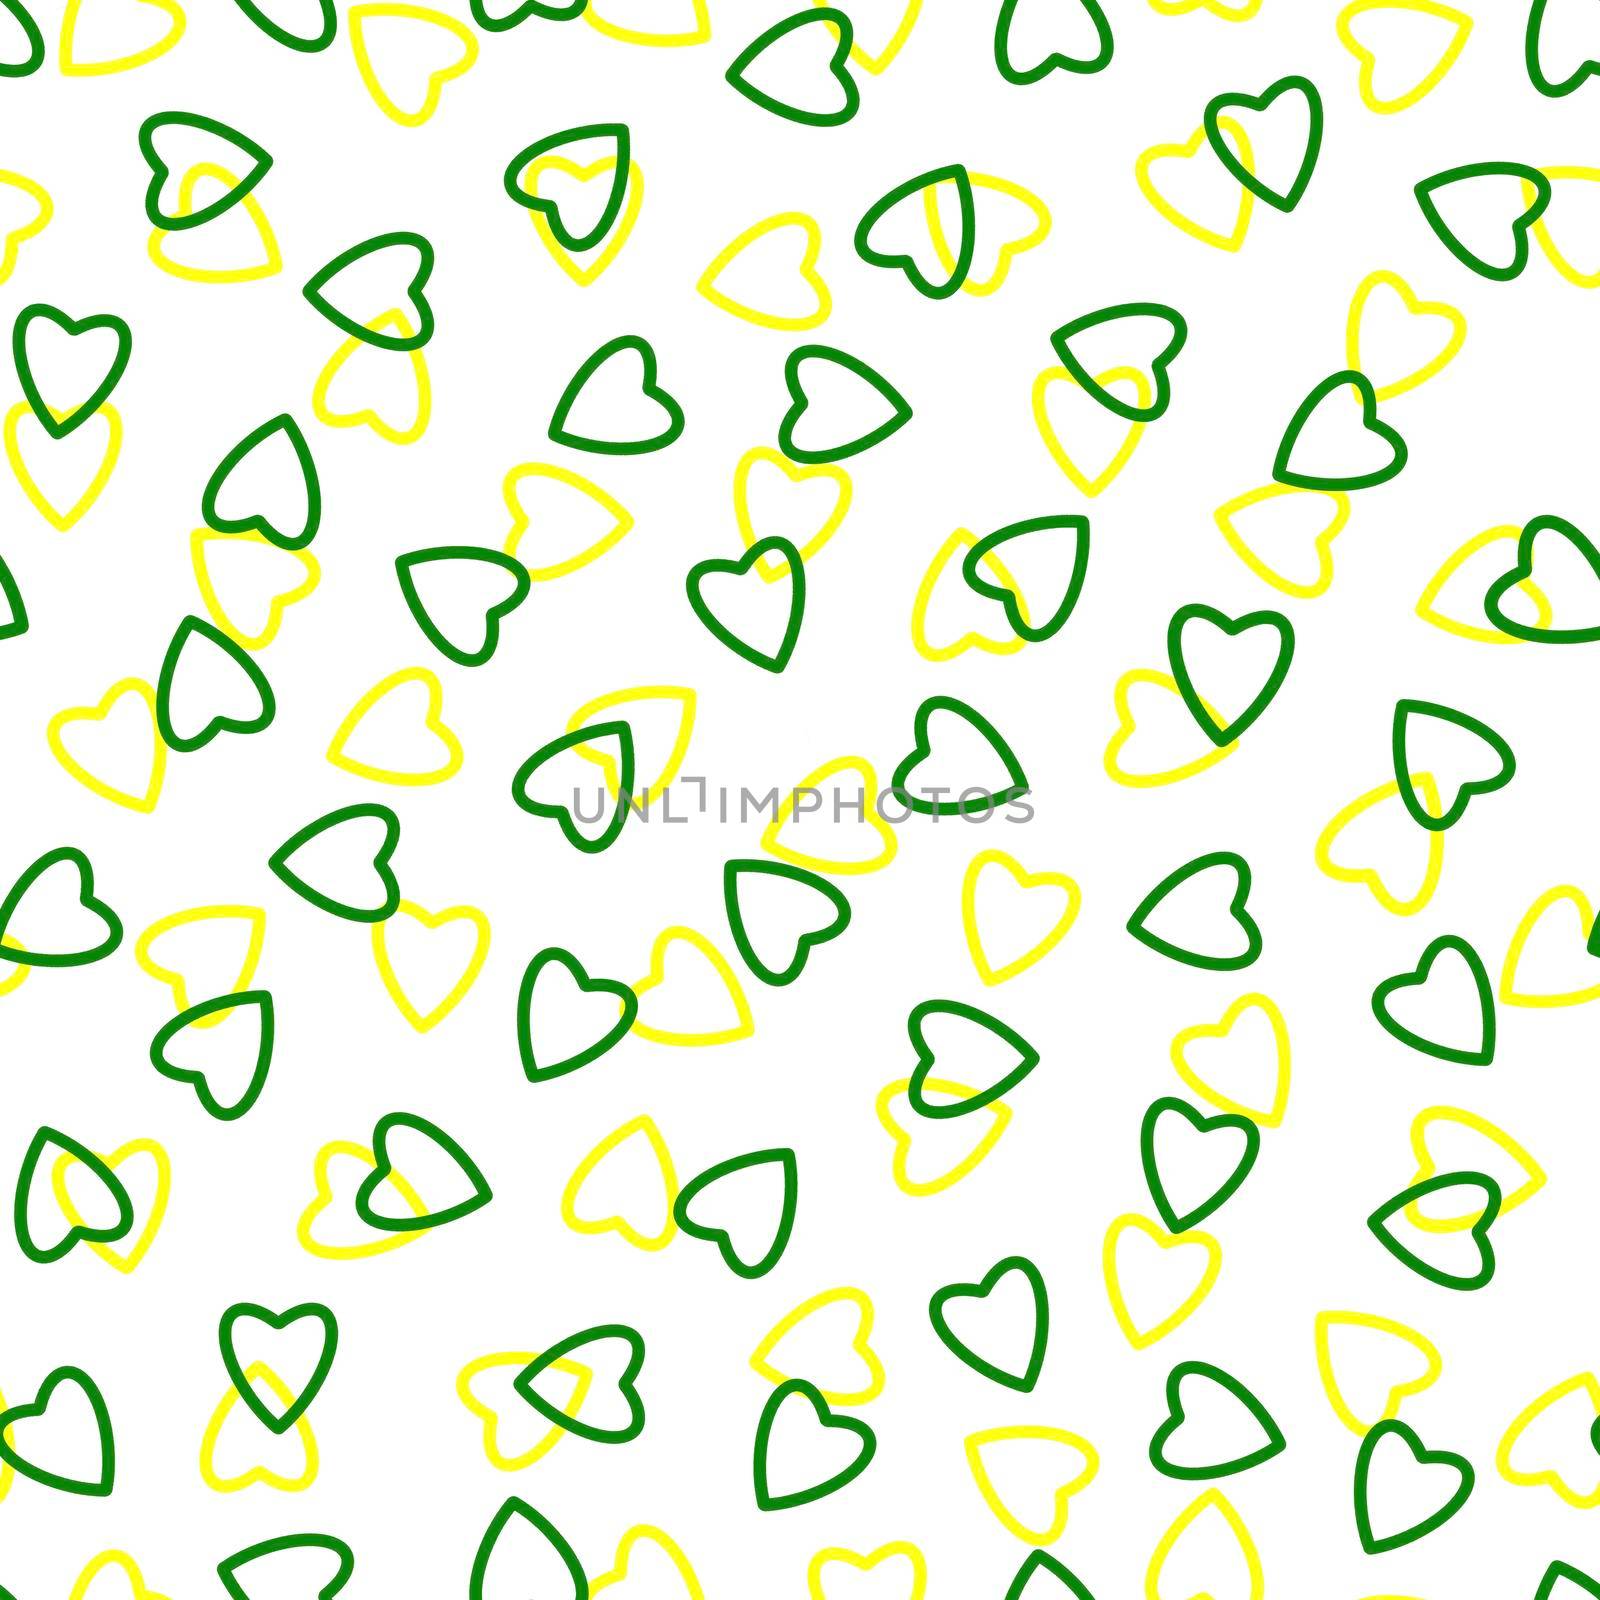 Simple hearts seamless pattern,endless chaotic texture made tiny heart silhouettes.Valentines,mothers day background.Great for Easter,wedding,scrapbook,gift wrapping paper,textiles.Green,yellow,white.